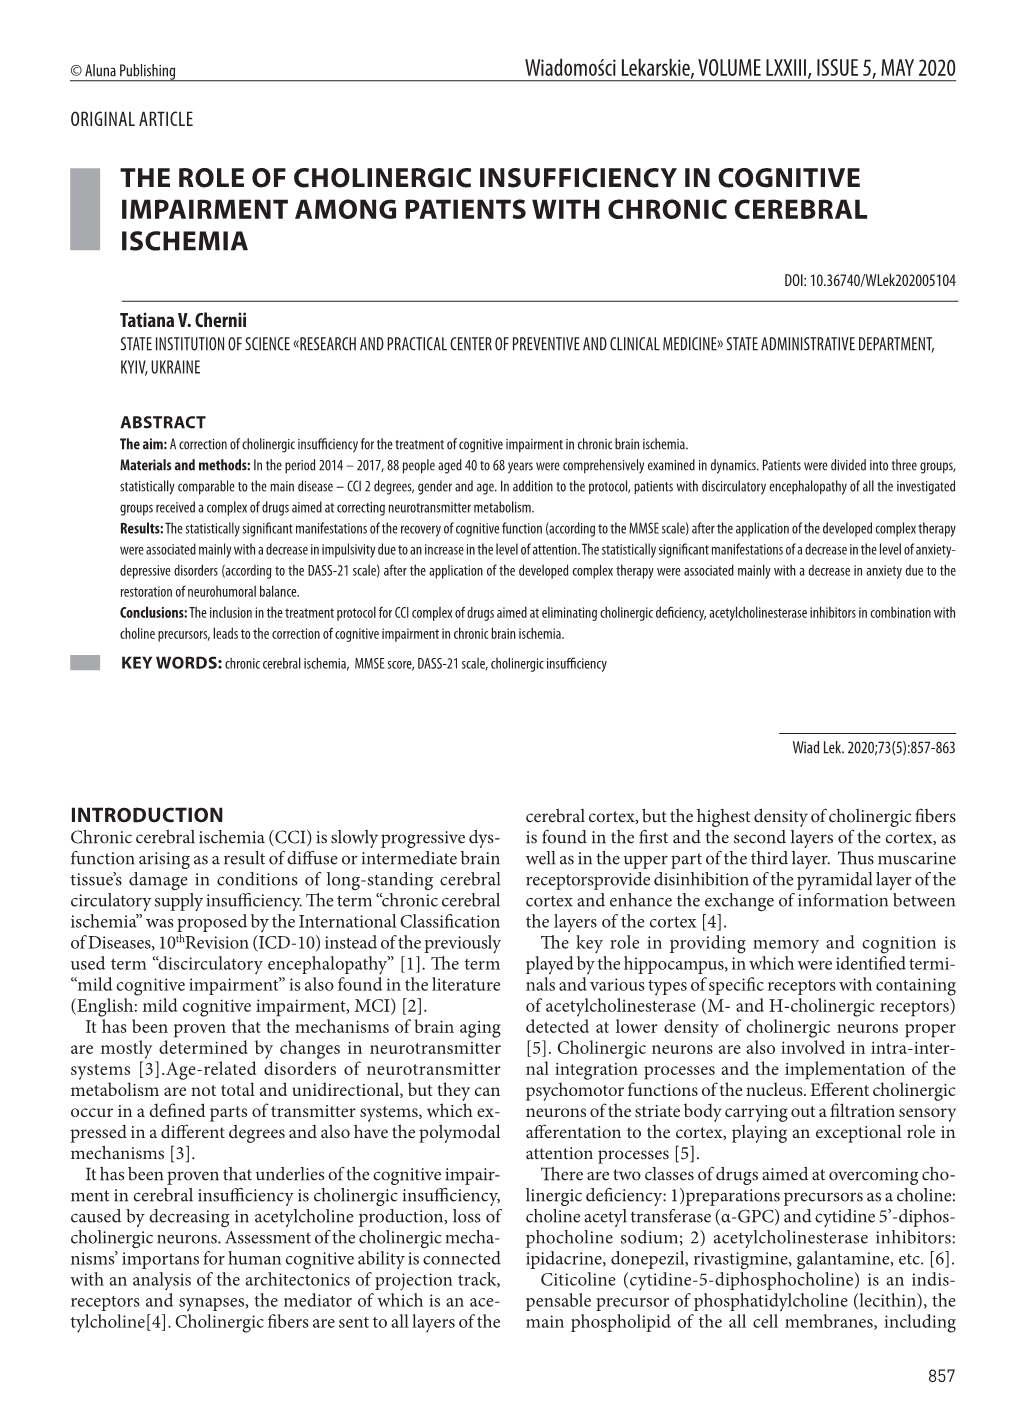 THE ROLE of CHOLINERGIC INSUFFICIENCY in COGNITIVE IMPAIRMENT AMONG PATIENTS with CHRONIC CEREBRAL ISCHEMIA DOI: 10.36740/Wlek202005104